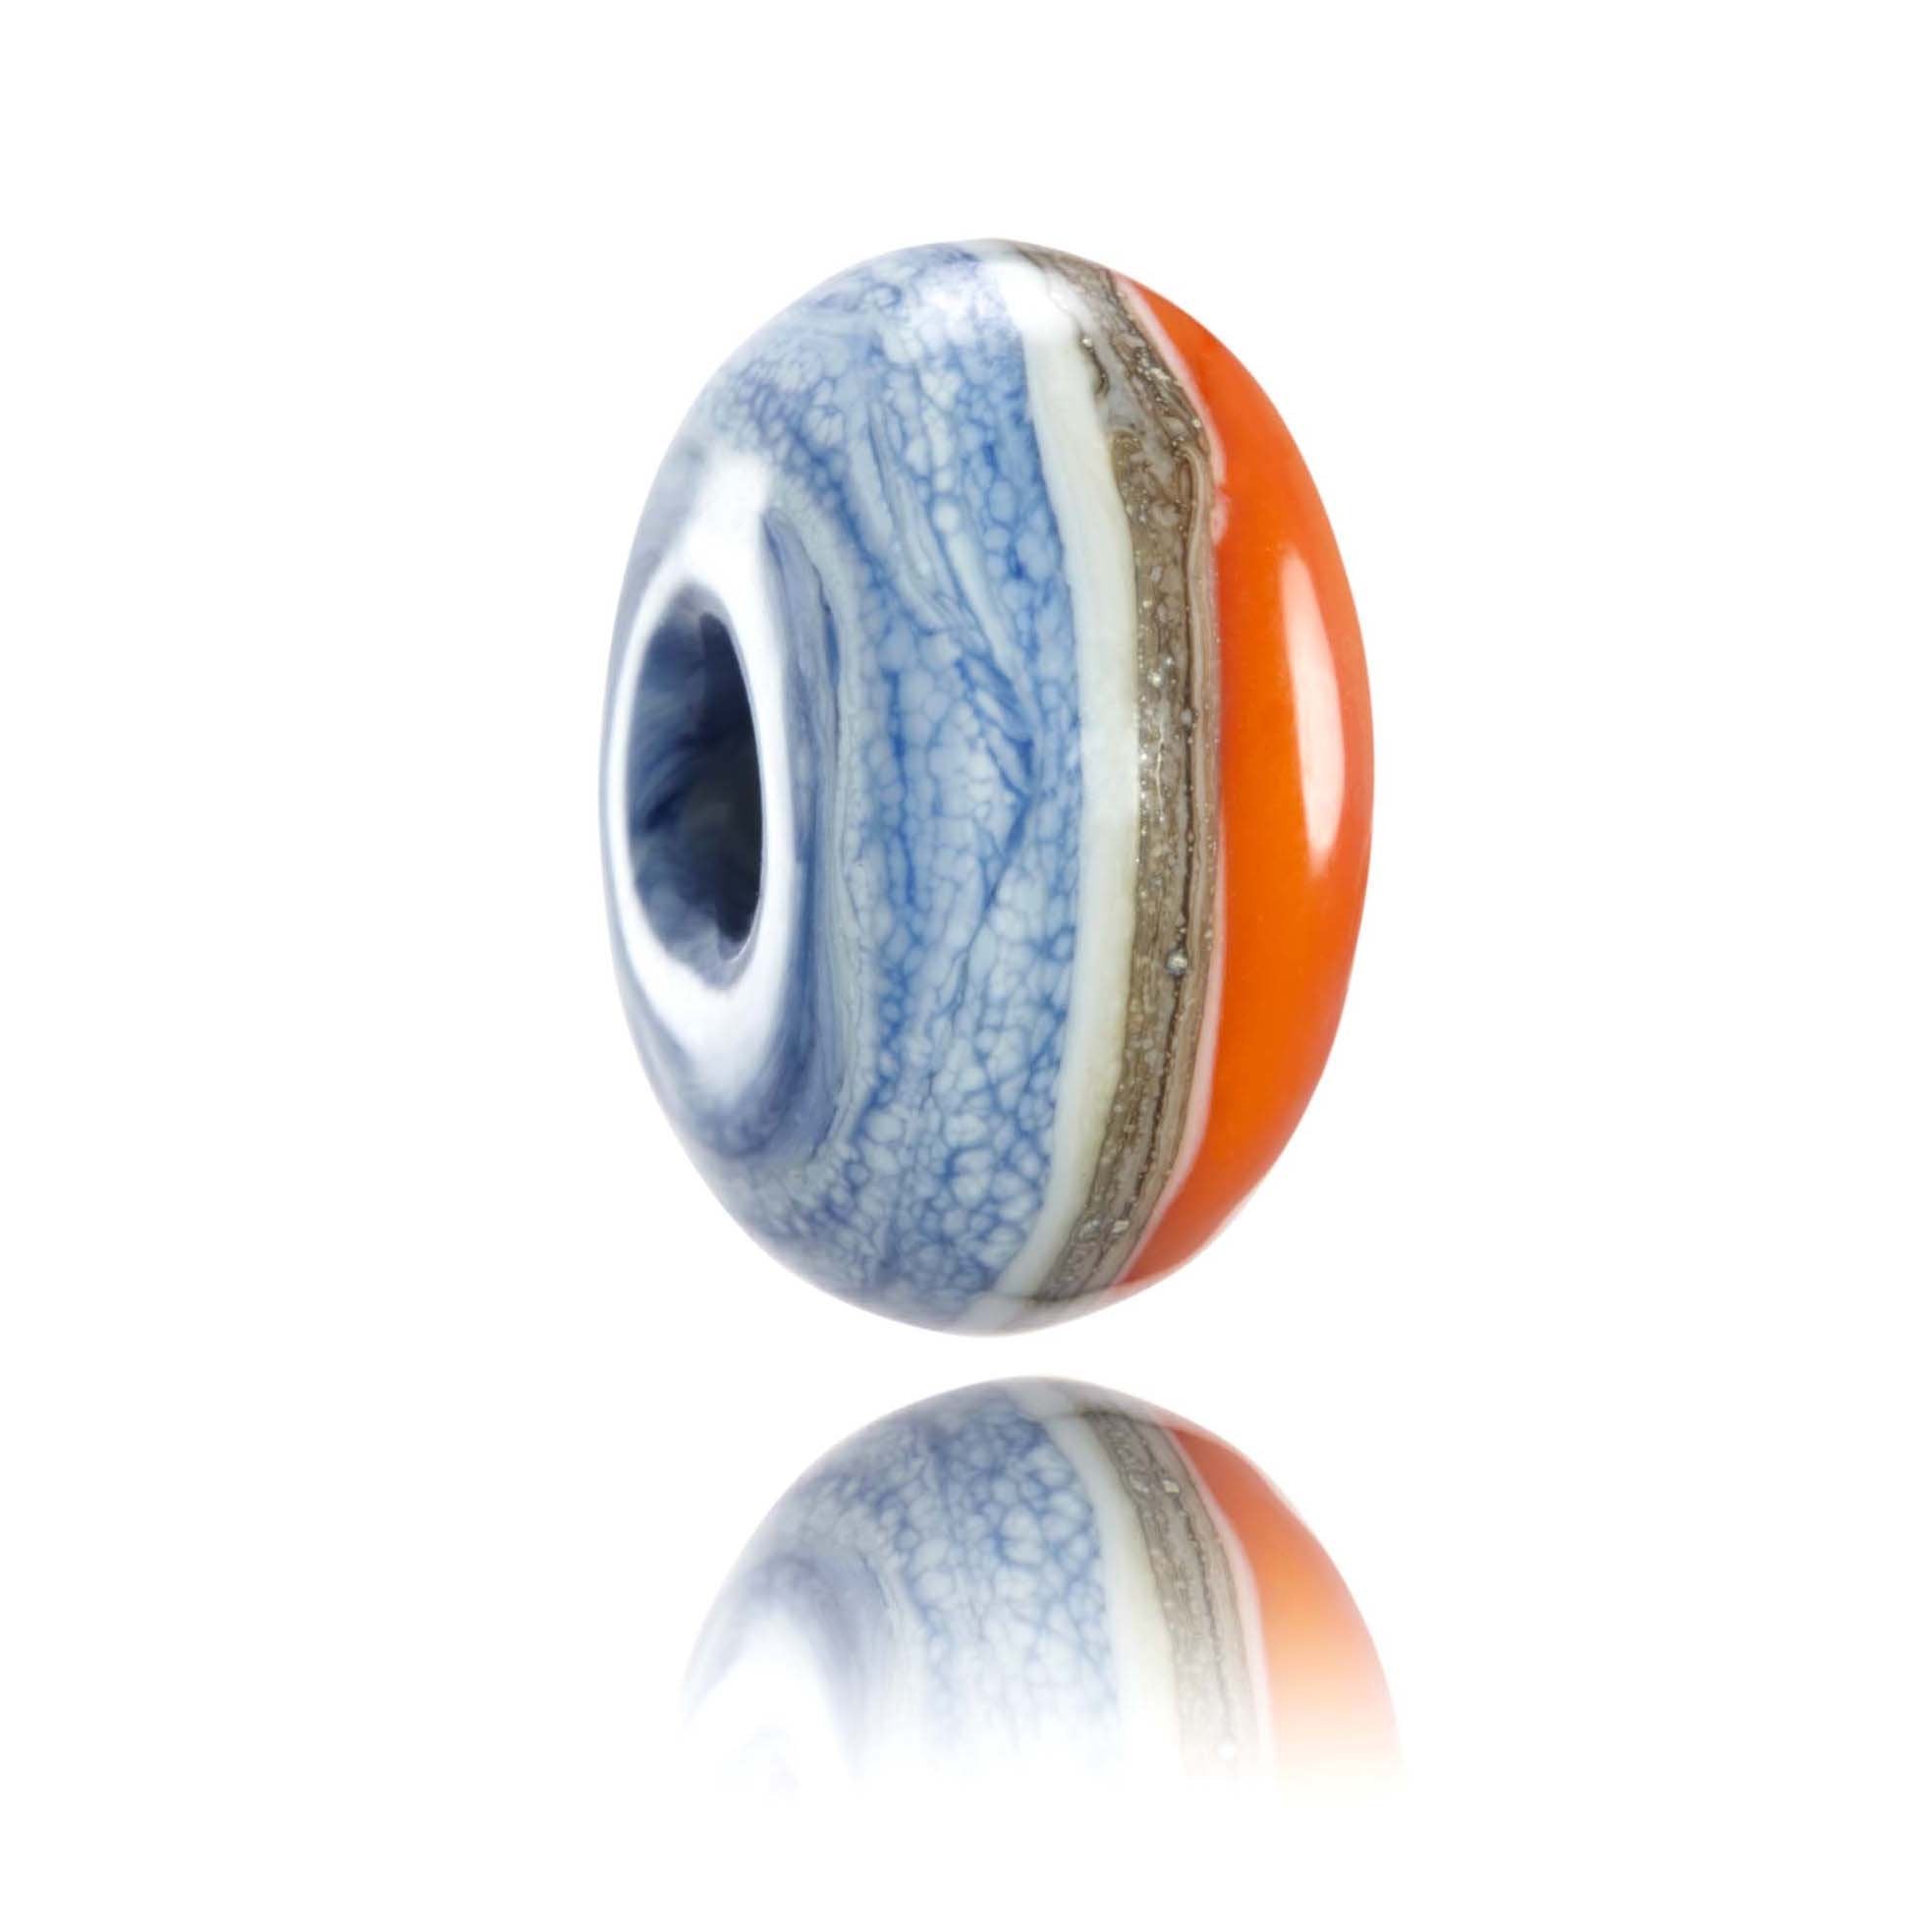 Lapis blue and orange glass bead with silver stringer around the middle for Durban, South Africa.